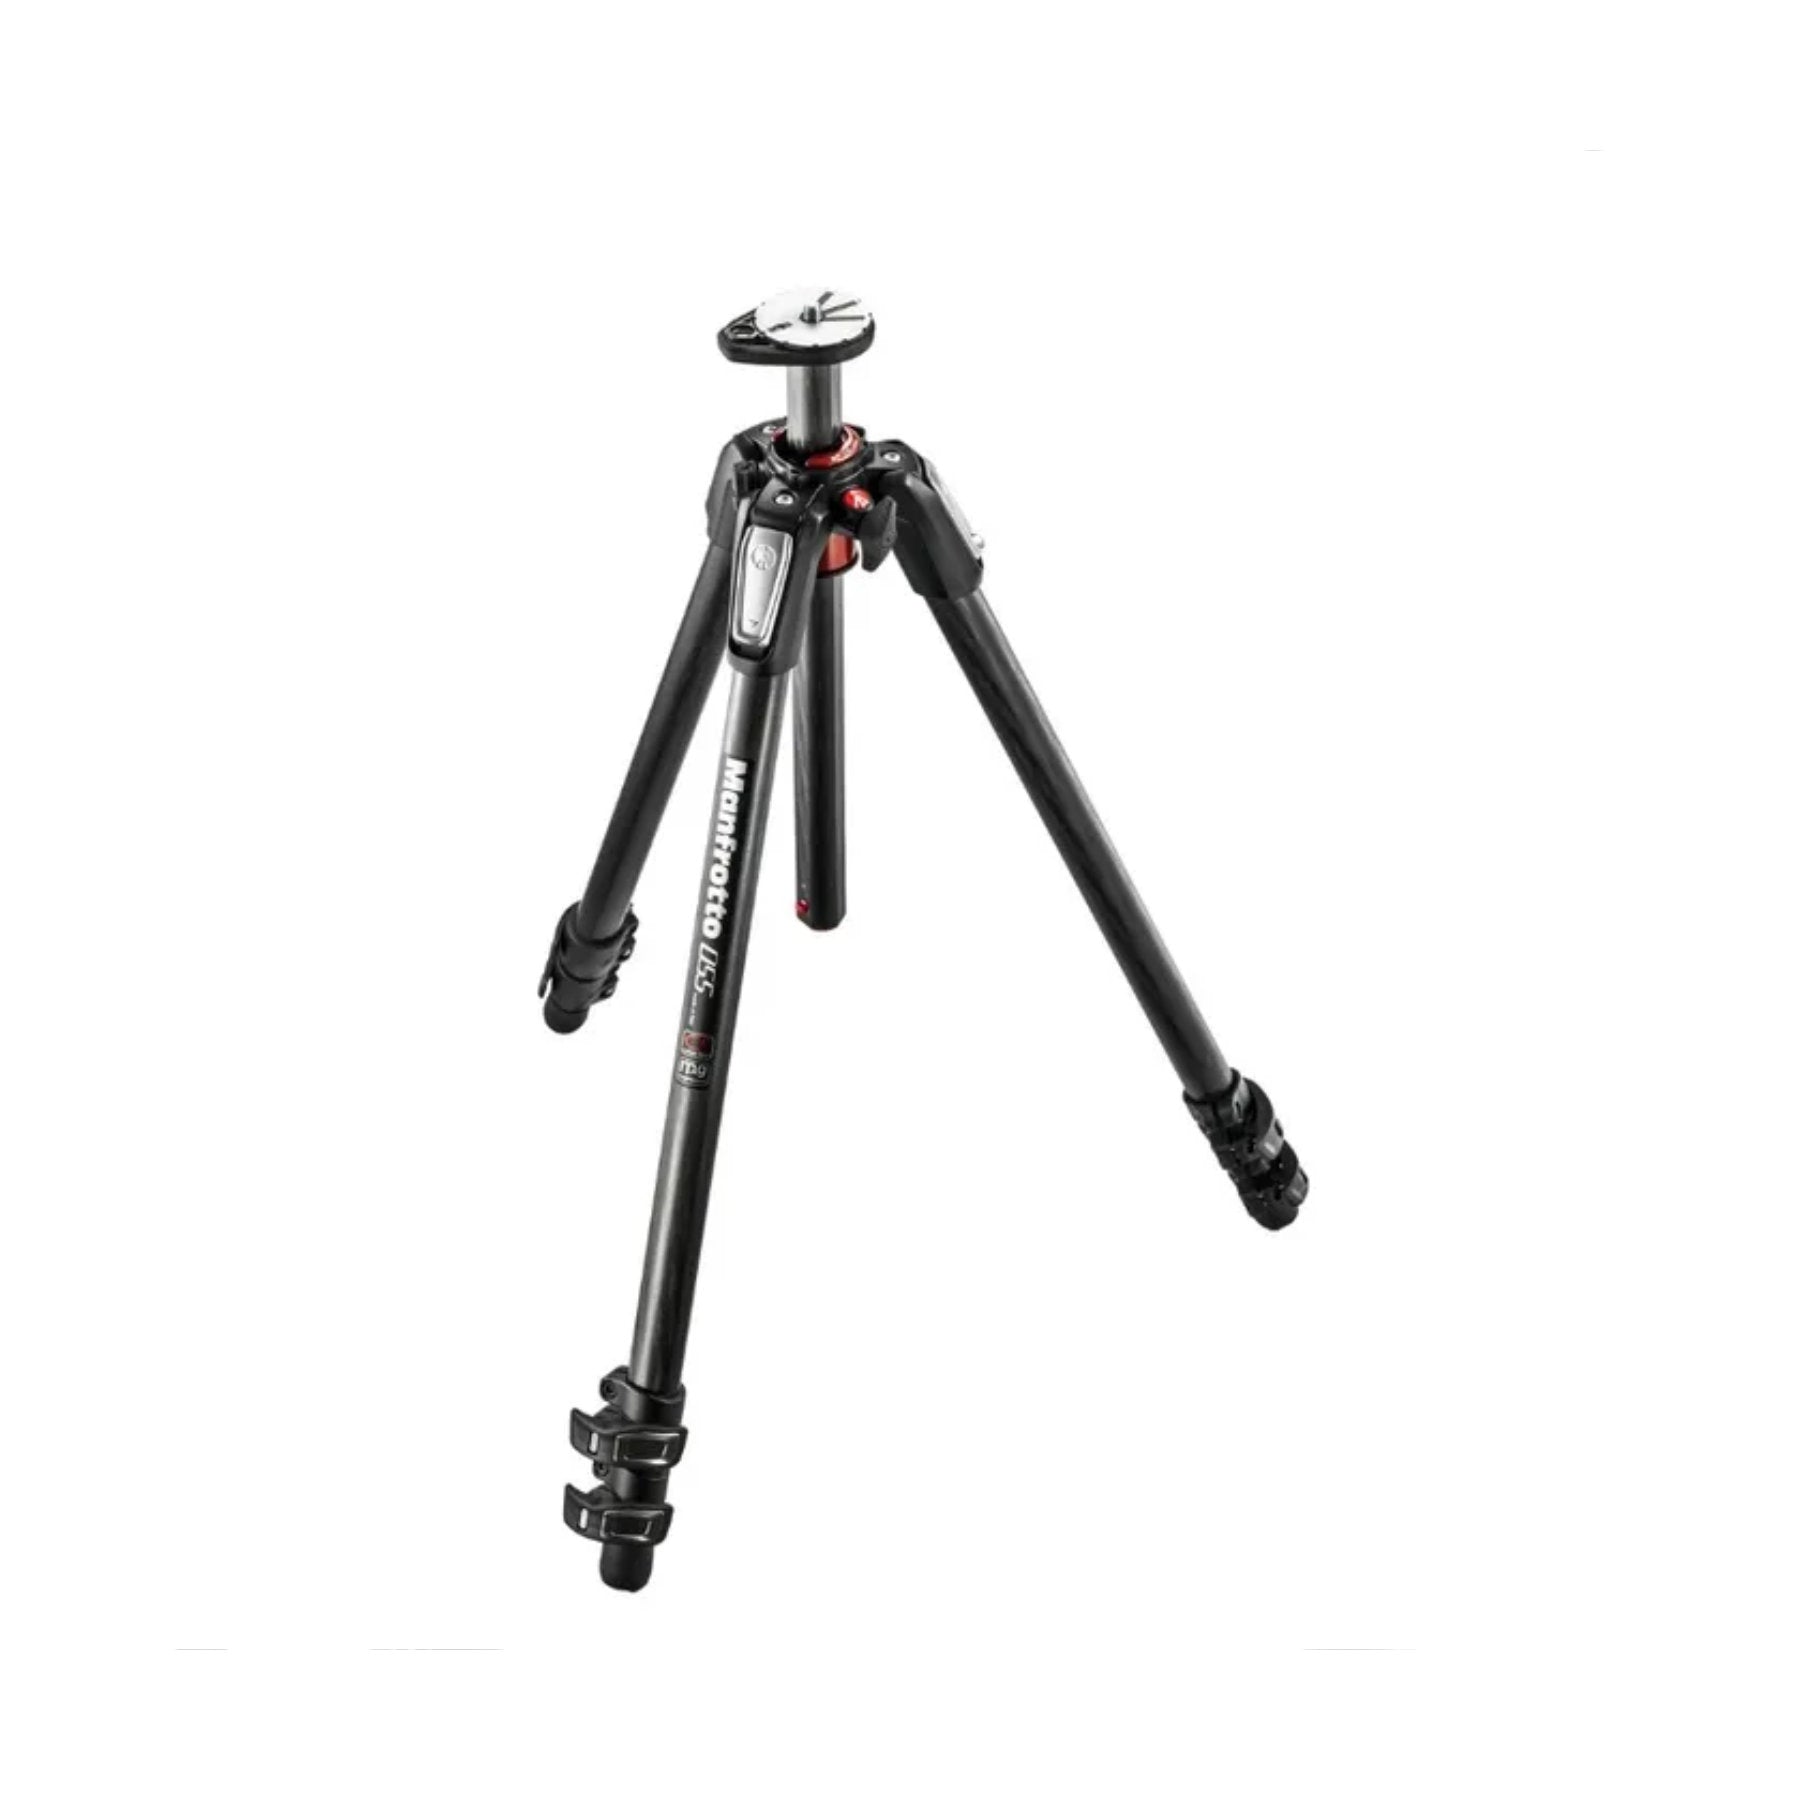 Buy Manfrotto 055 Carbon Fibre Tripod 3 Section at Topic Store